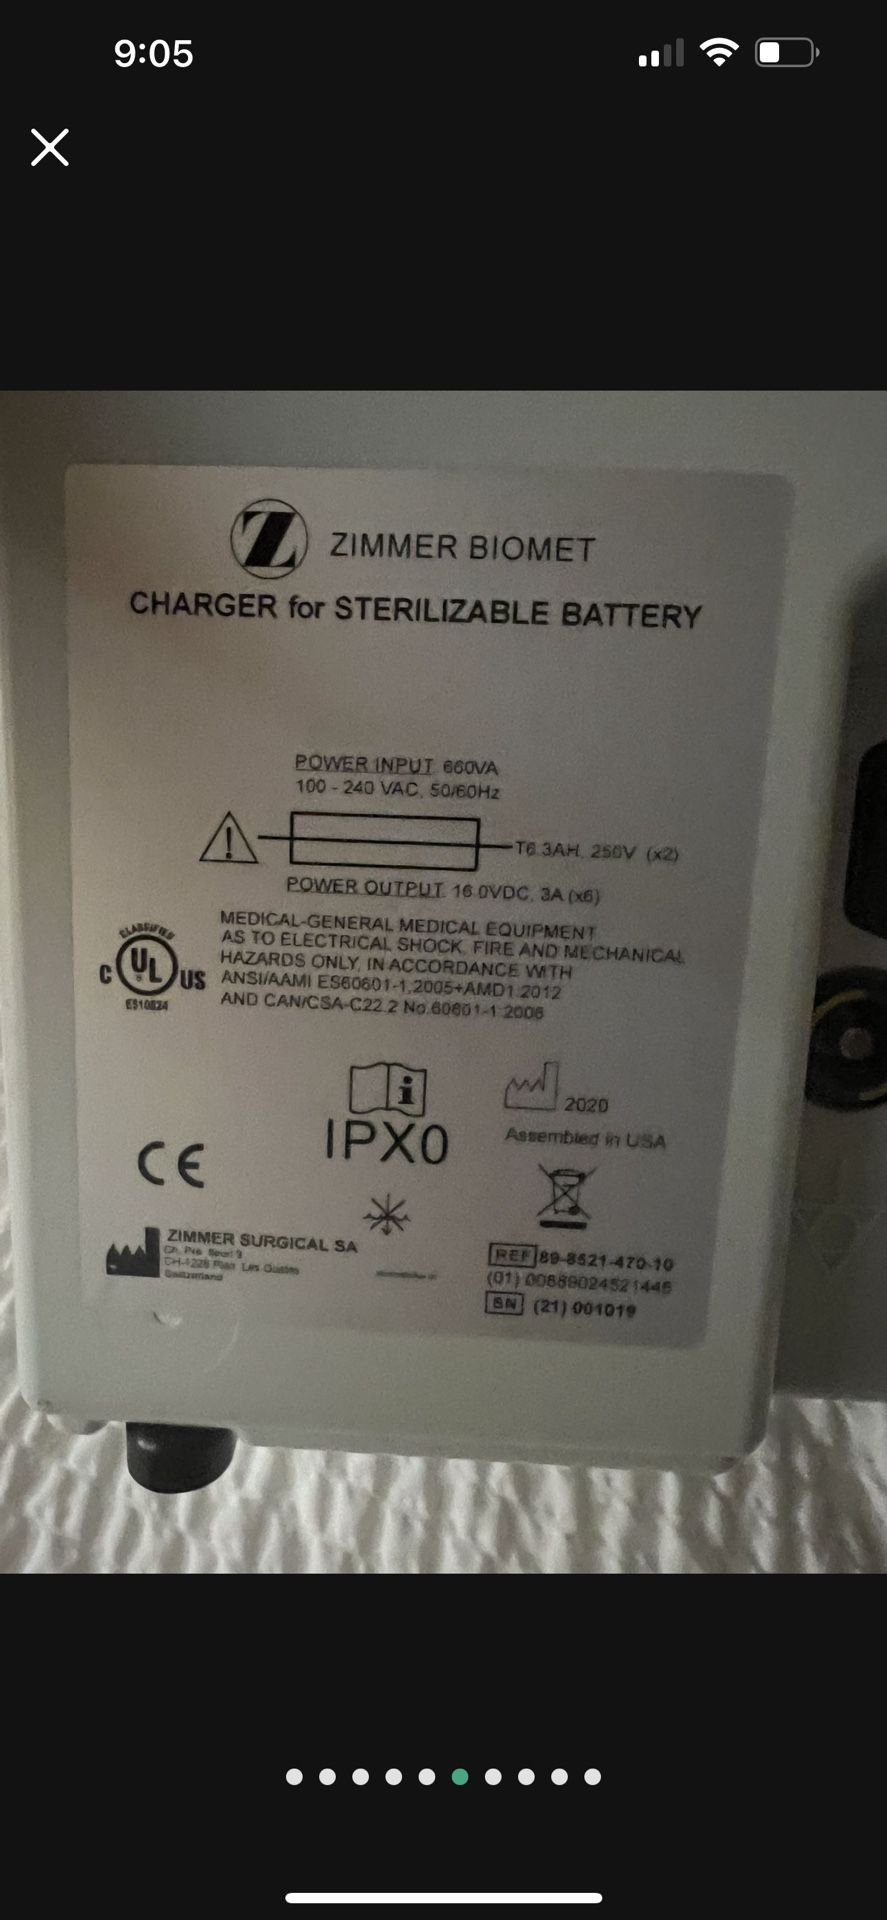 Zimmer Biomet X Series Power System - Charger For Sterilizable Battery  Medical Surgical Hospital Charging Device - WORKS PERFECTLY - 6 Batteries  Fit! for Sale in Irvine, CA - OfferUp